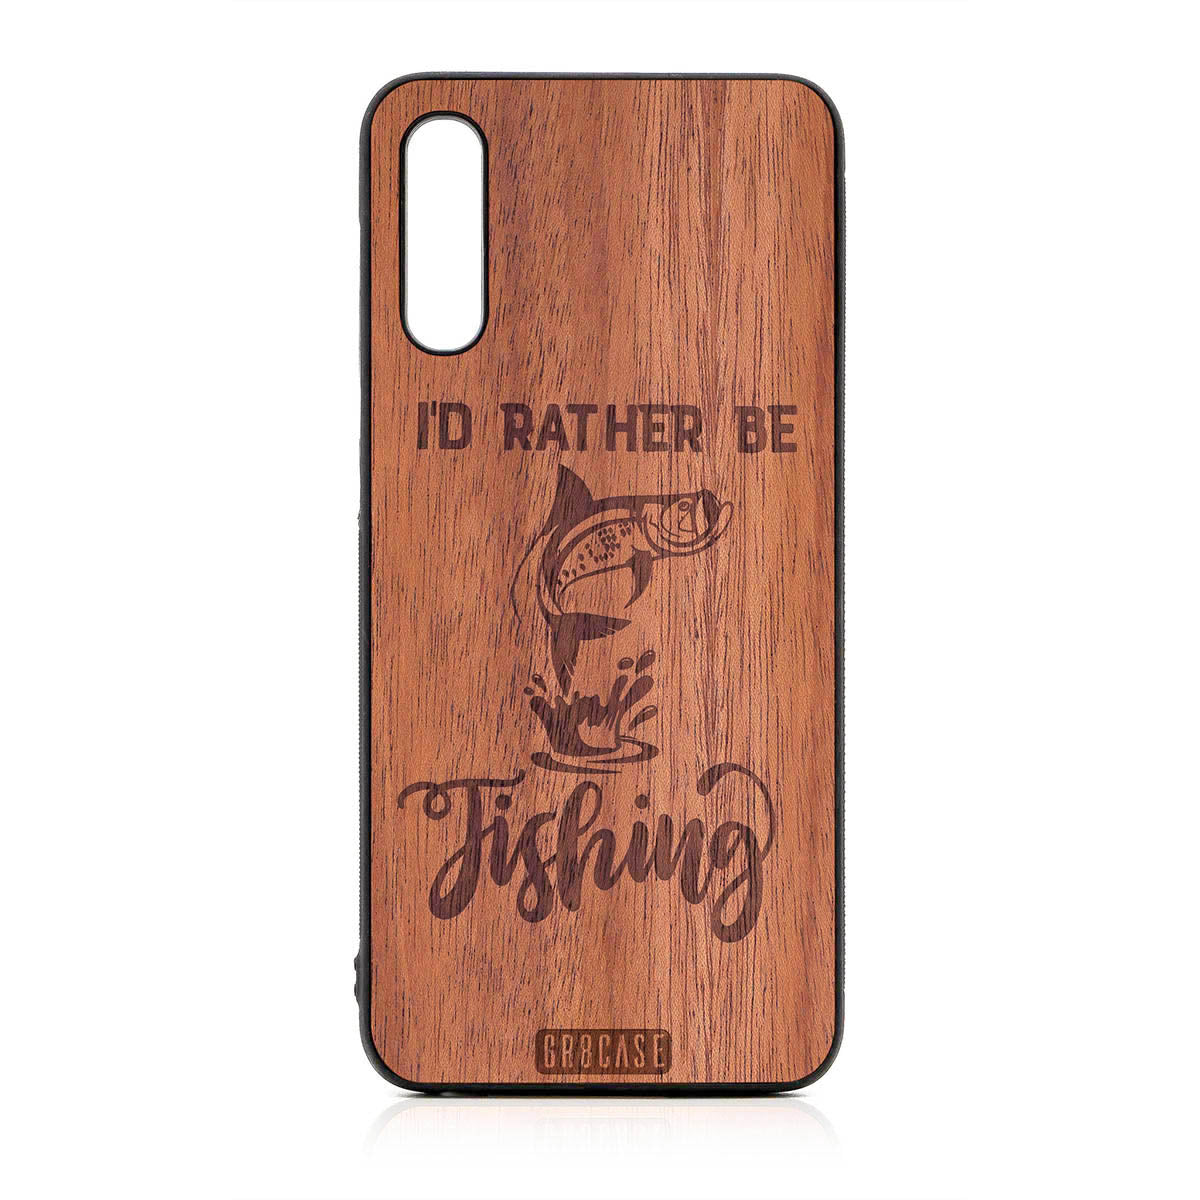 I'D Rather Be Fishing Design Wood Case For Samsung Galaxy A50